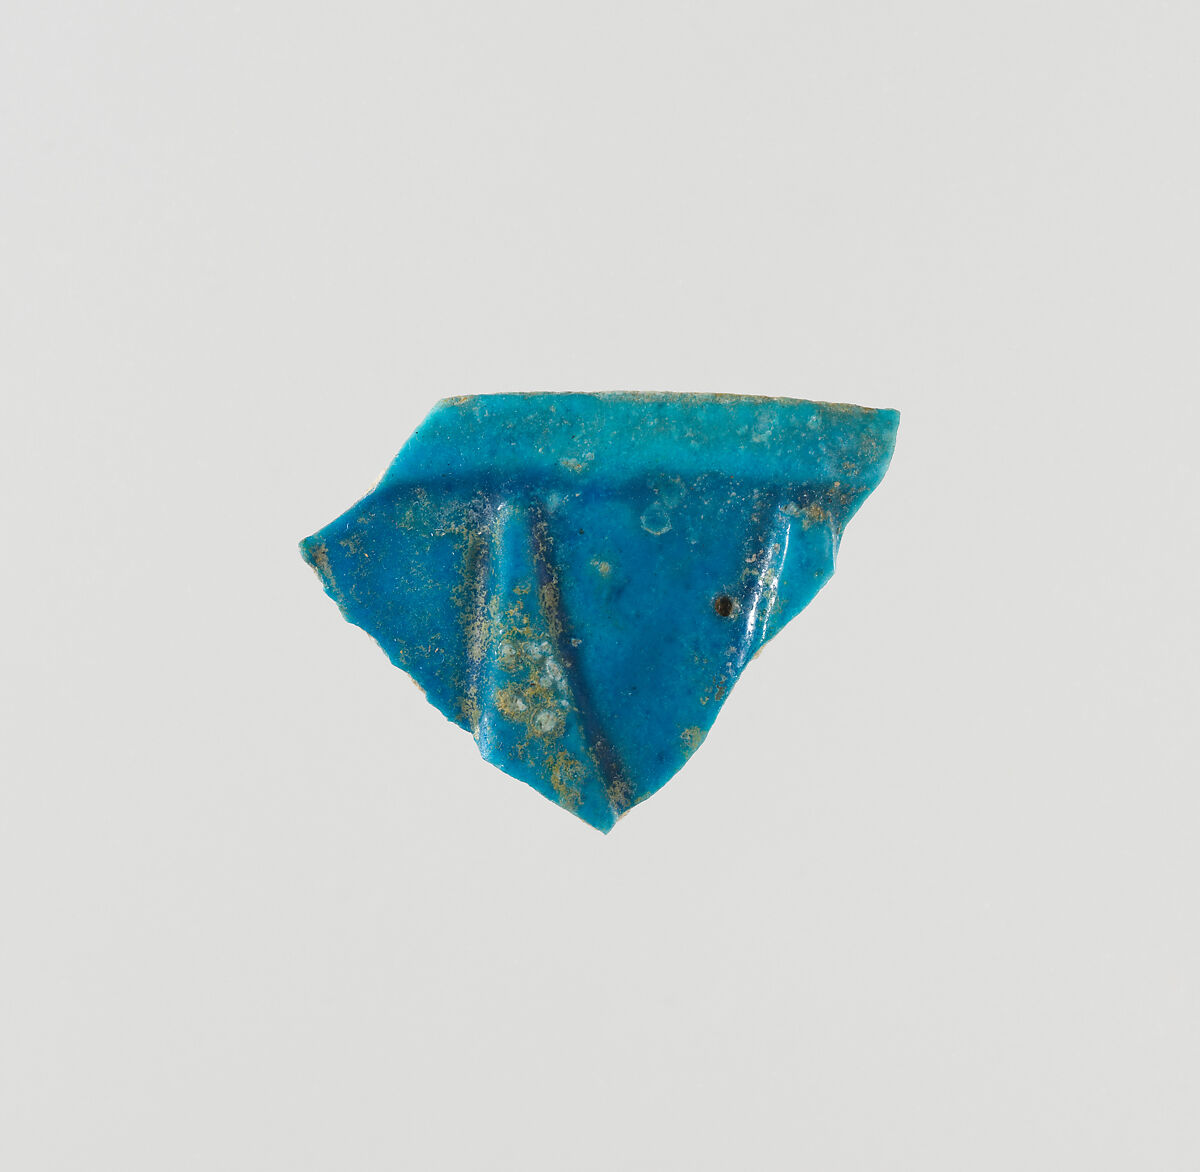 Rim Fragment of a Lotiform Chalice, Faience 